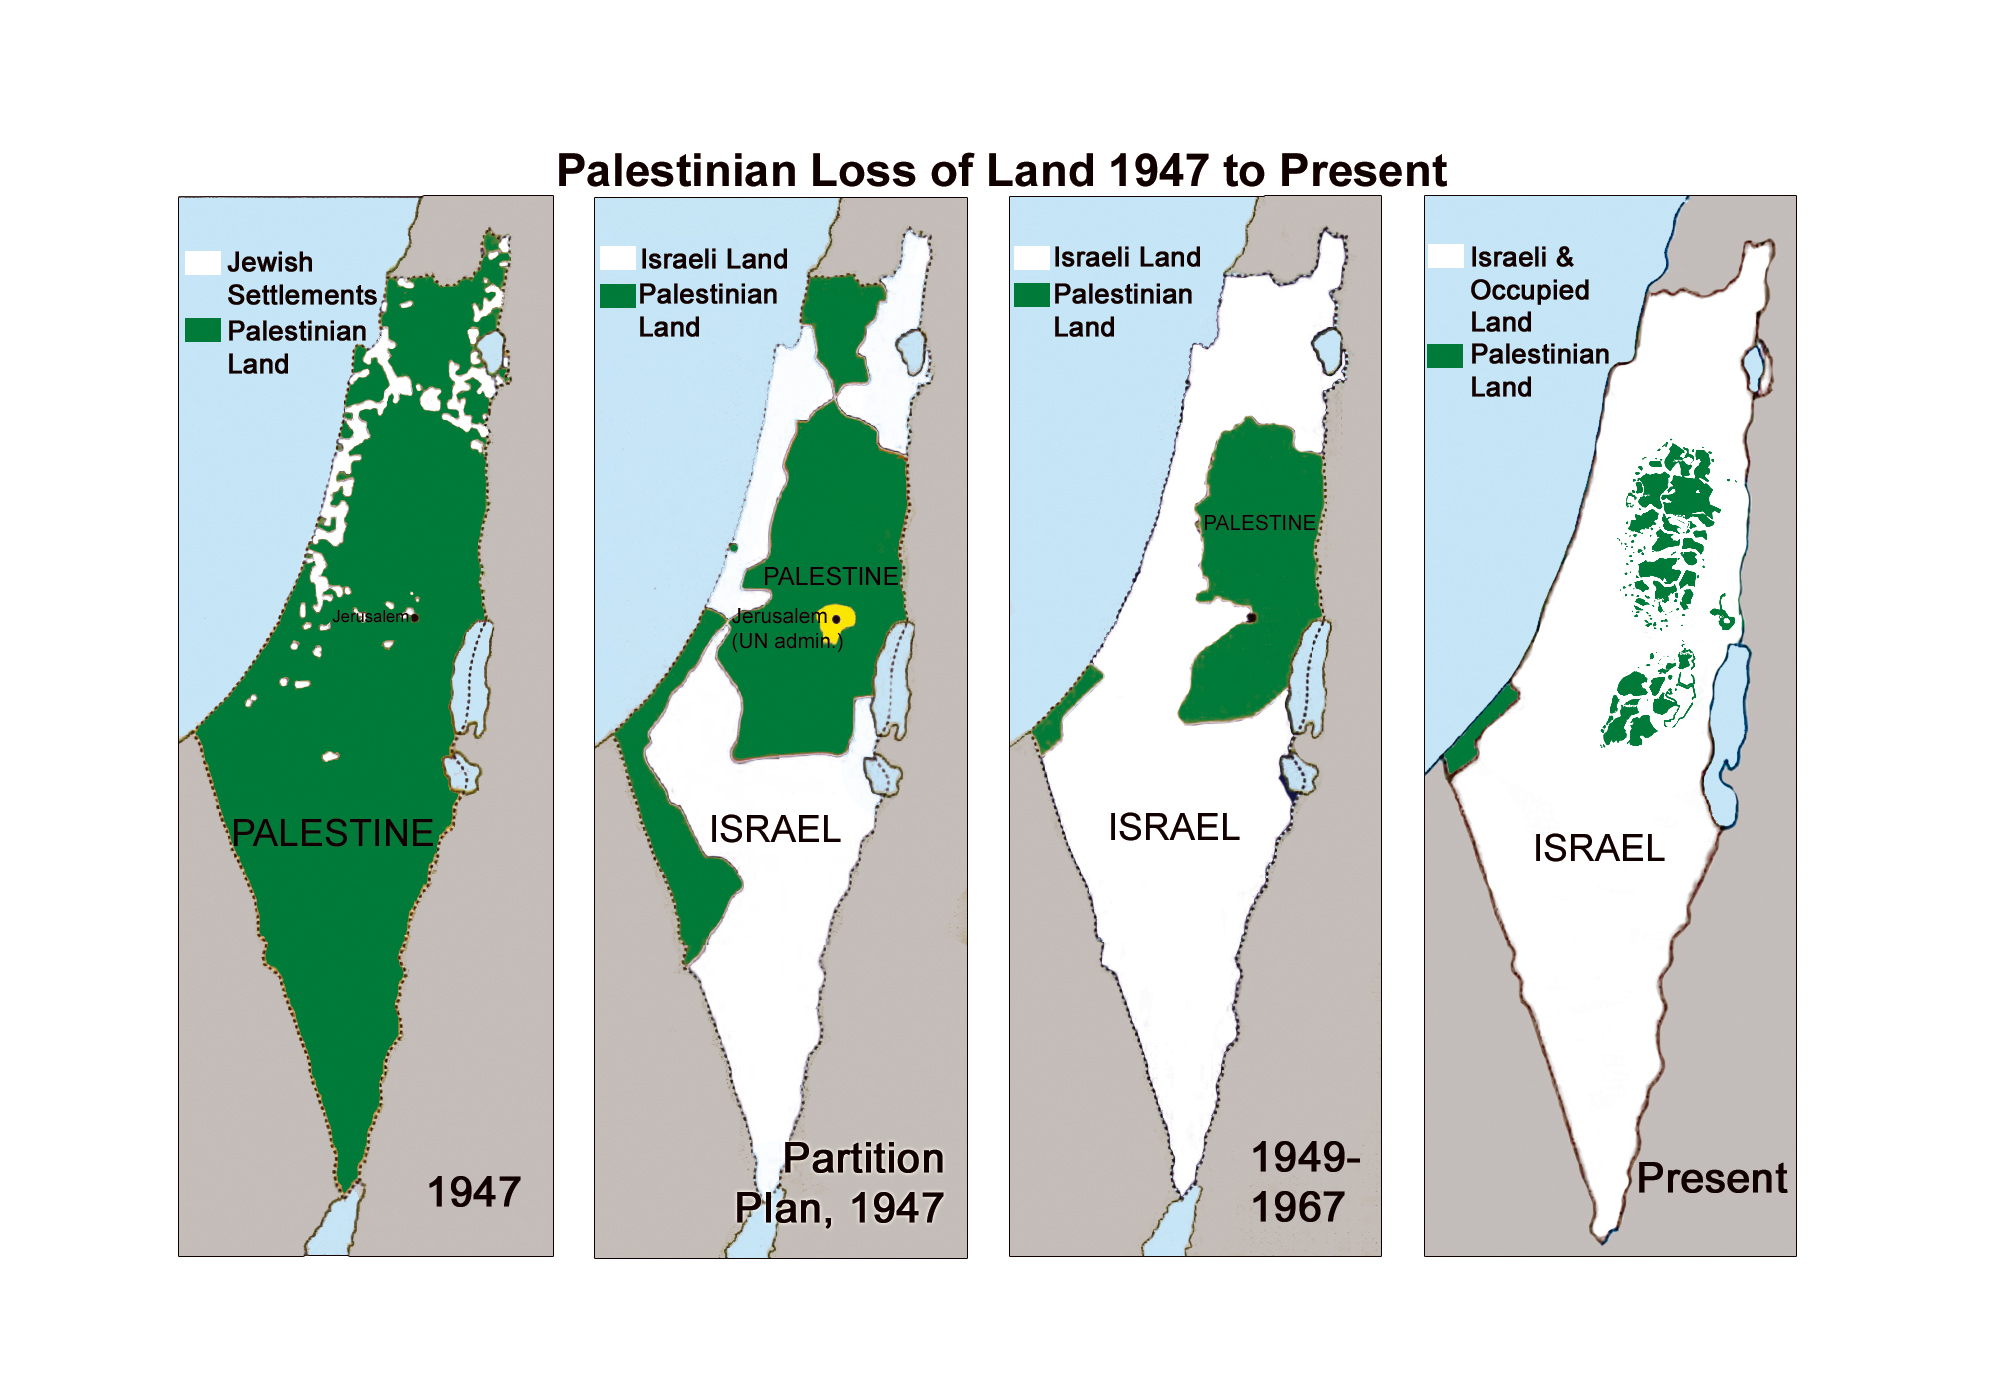 large-map-of-palestinian-loss-of-land-1947-to-present.jpg